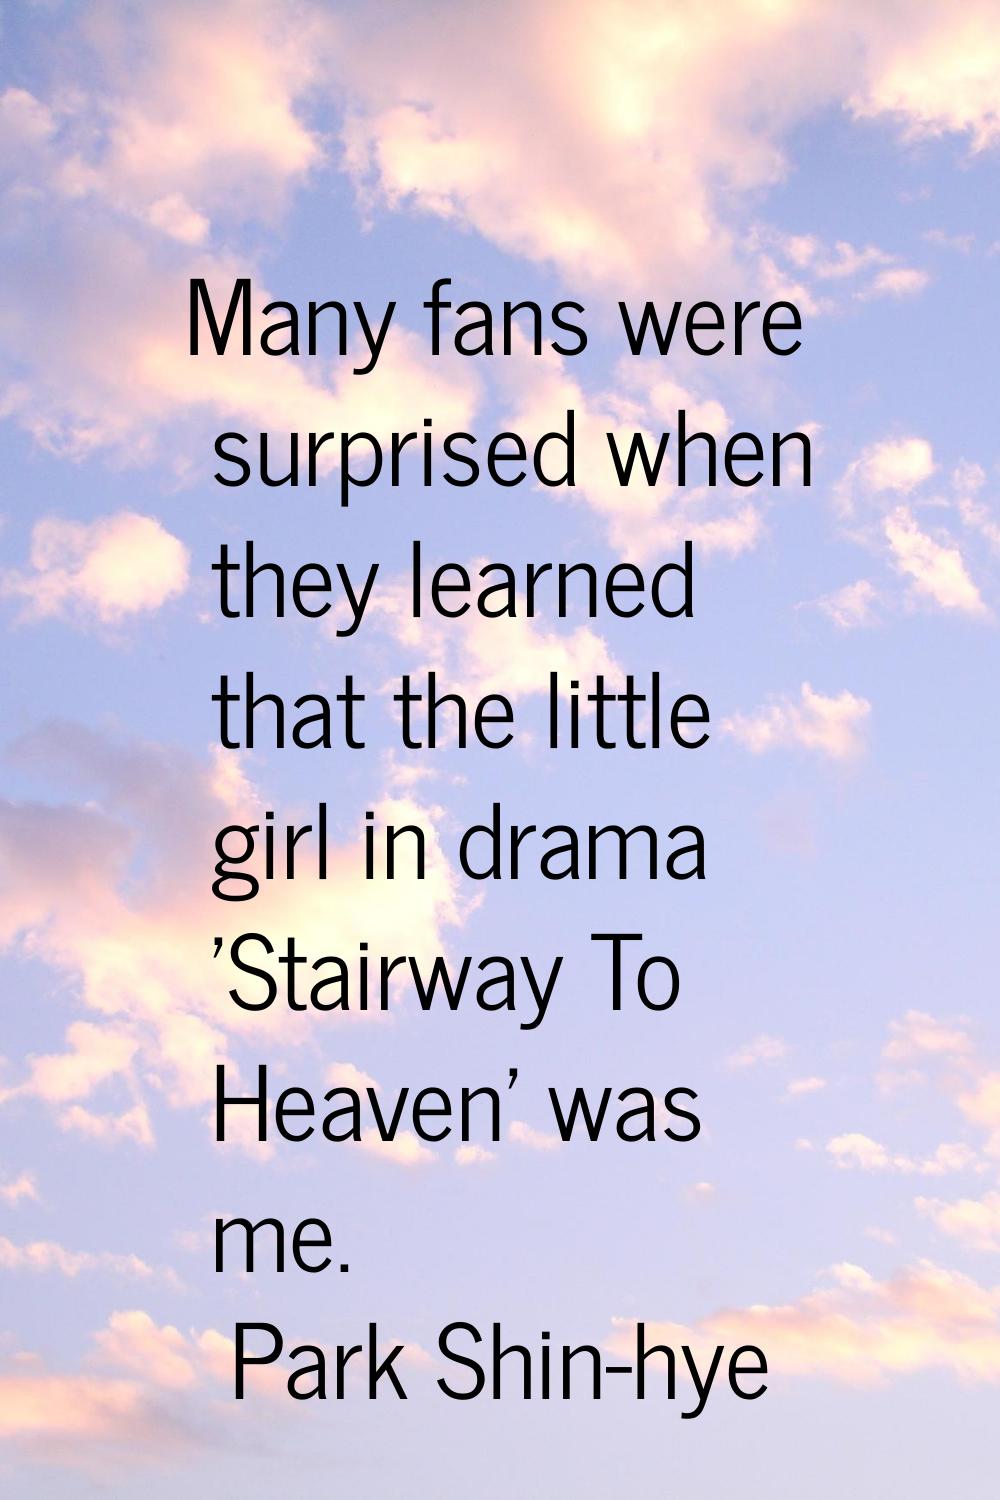 Many fans were surprised when they learned that the little girl in drama 'Stairway To Heaven' was m